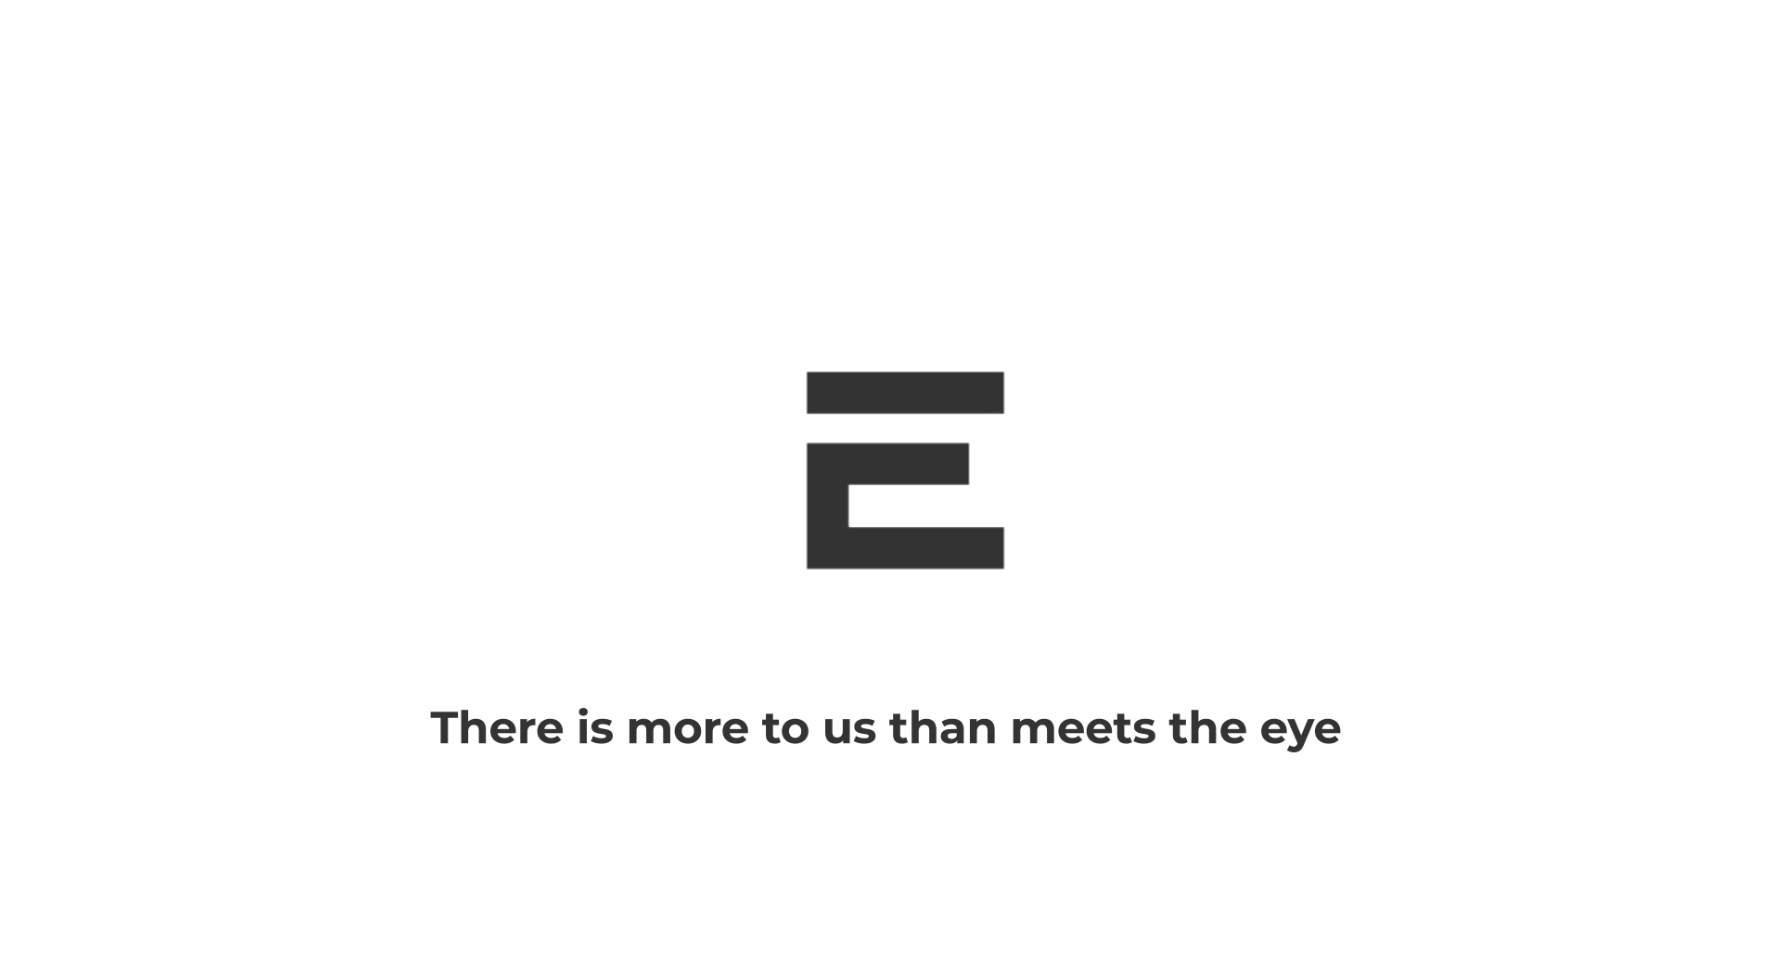 Create, Design, Evolve. Ergo Creative. There is more to us than meets the eye. V2